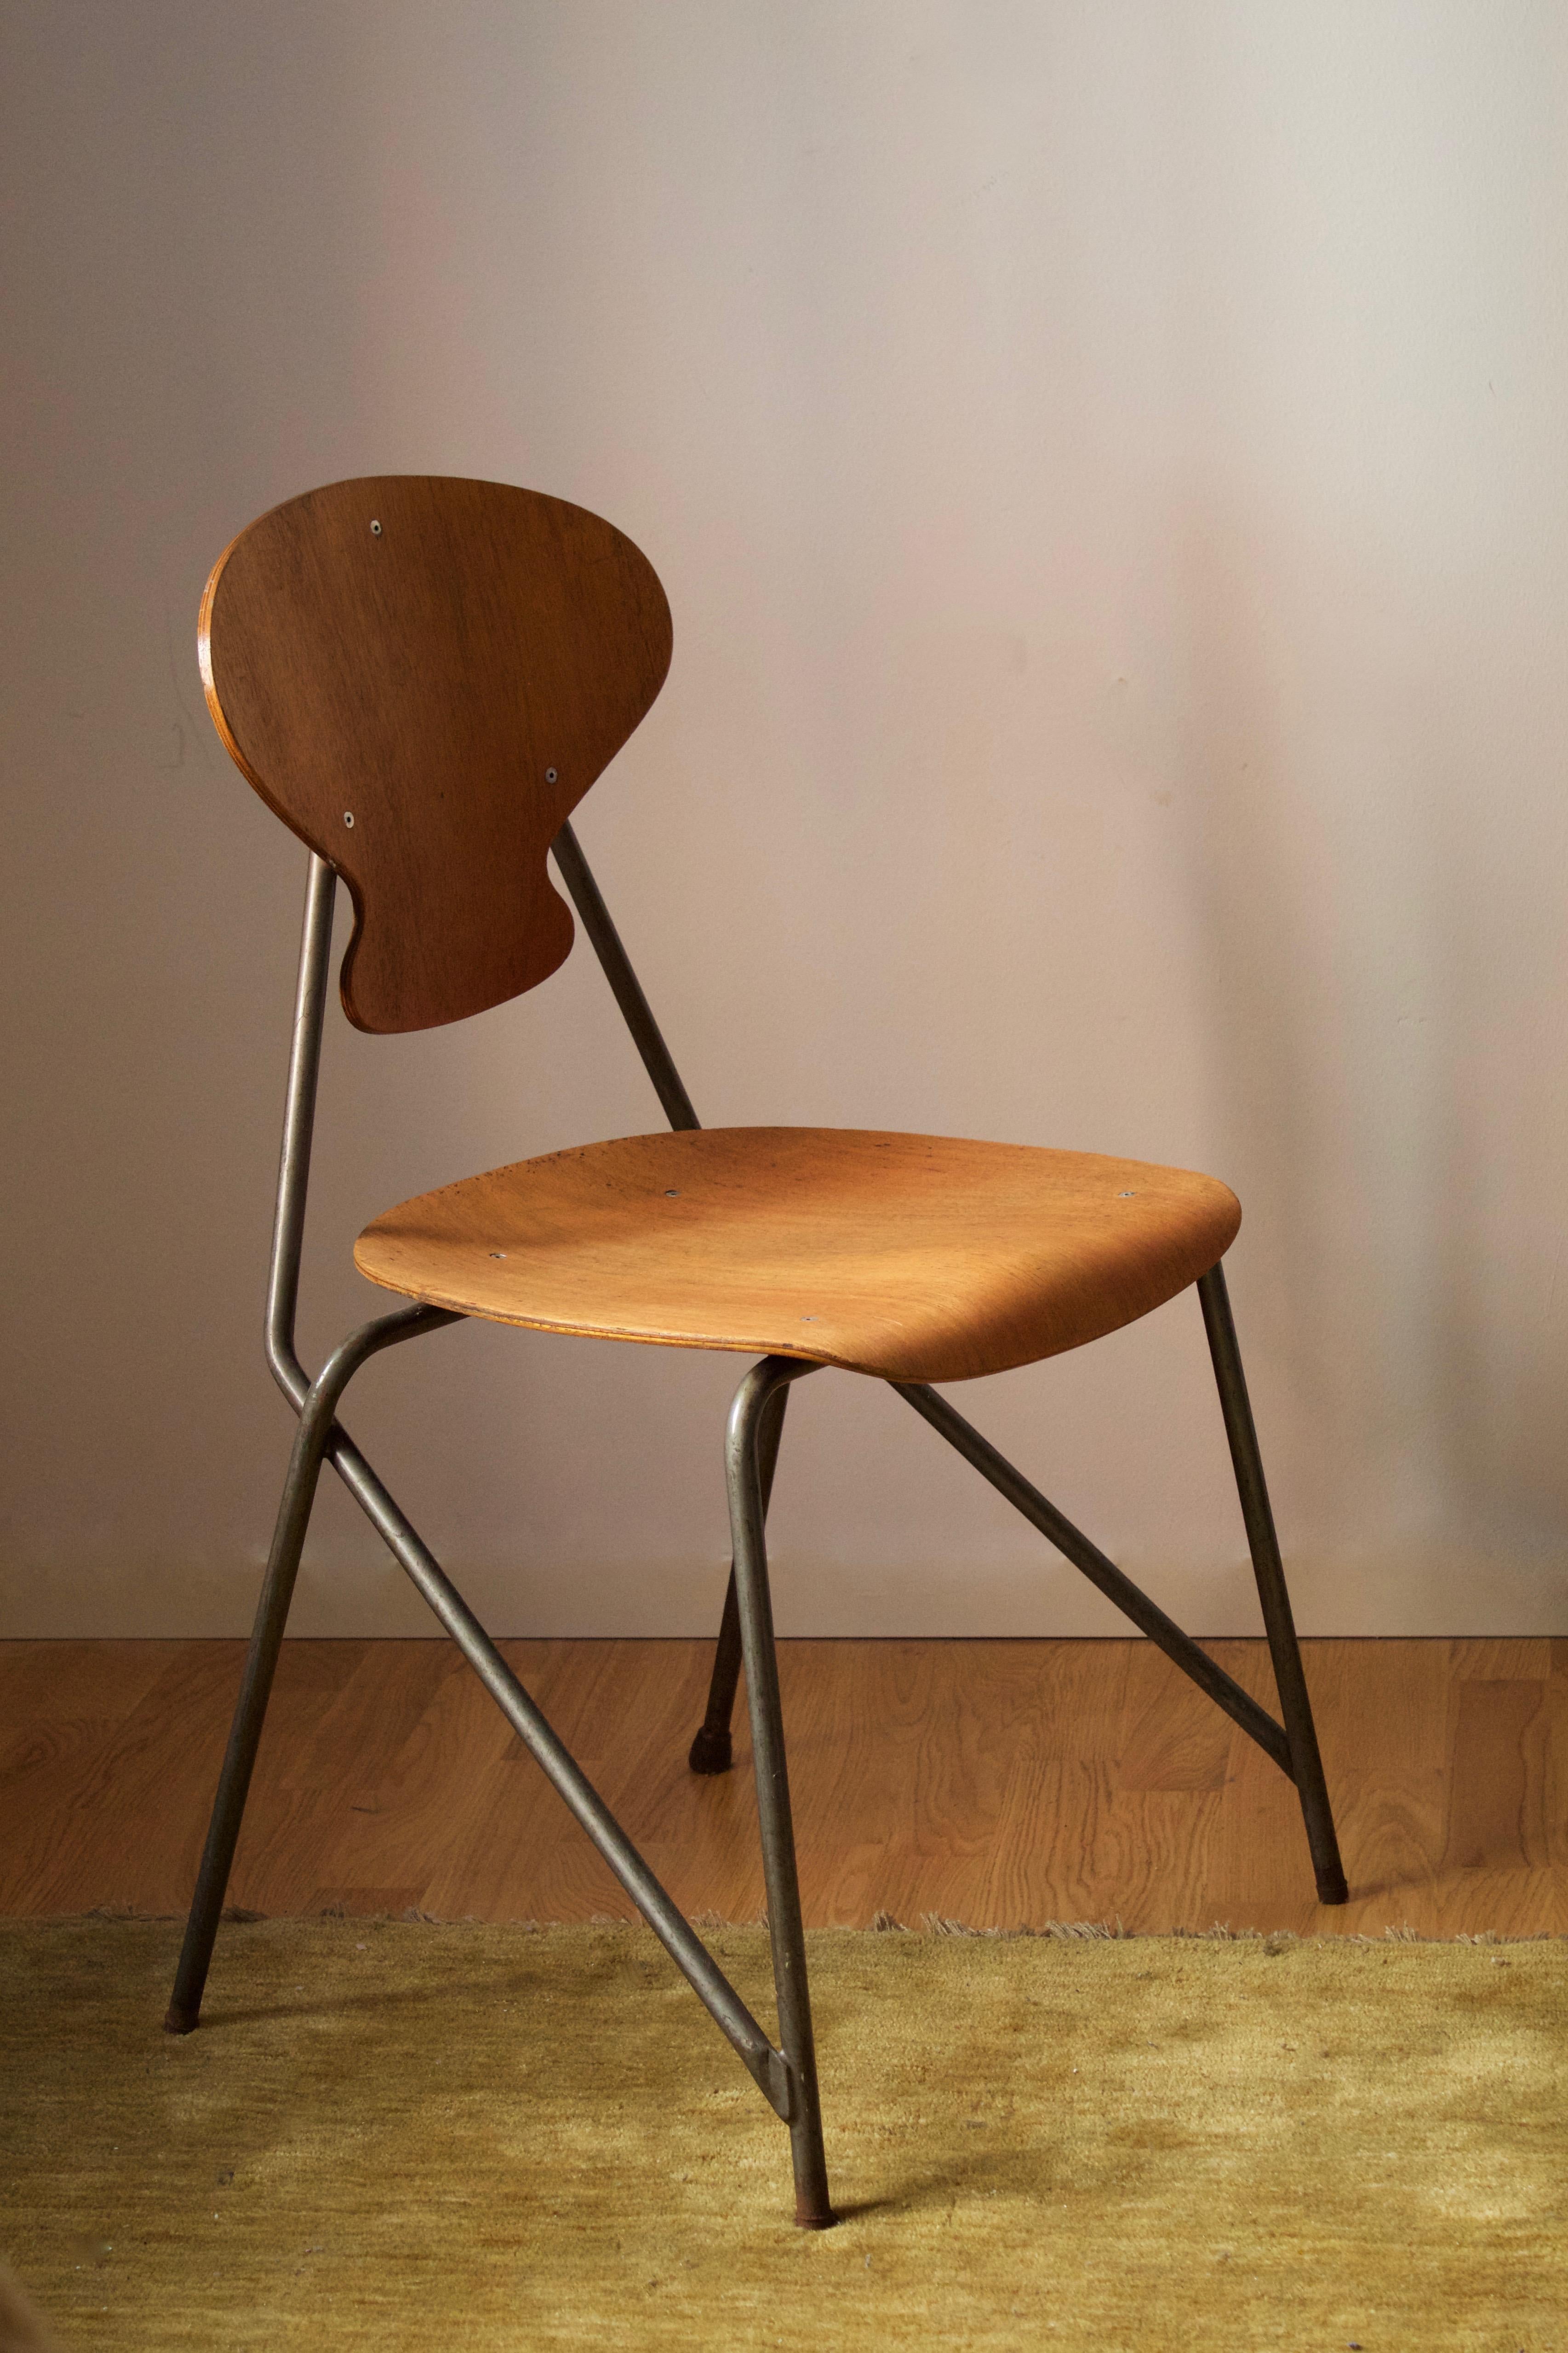 A chair designed by important Danish architect Steen Eiler Rasmussen in partnership with product designer Kai Lyngfeldt Larsen. Designed for Rasmussens Rungsted Skole in 1954. Produced by Danbork.

Example from the original interior.